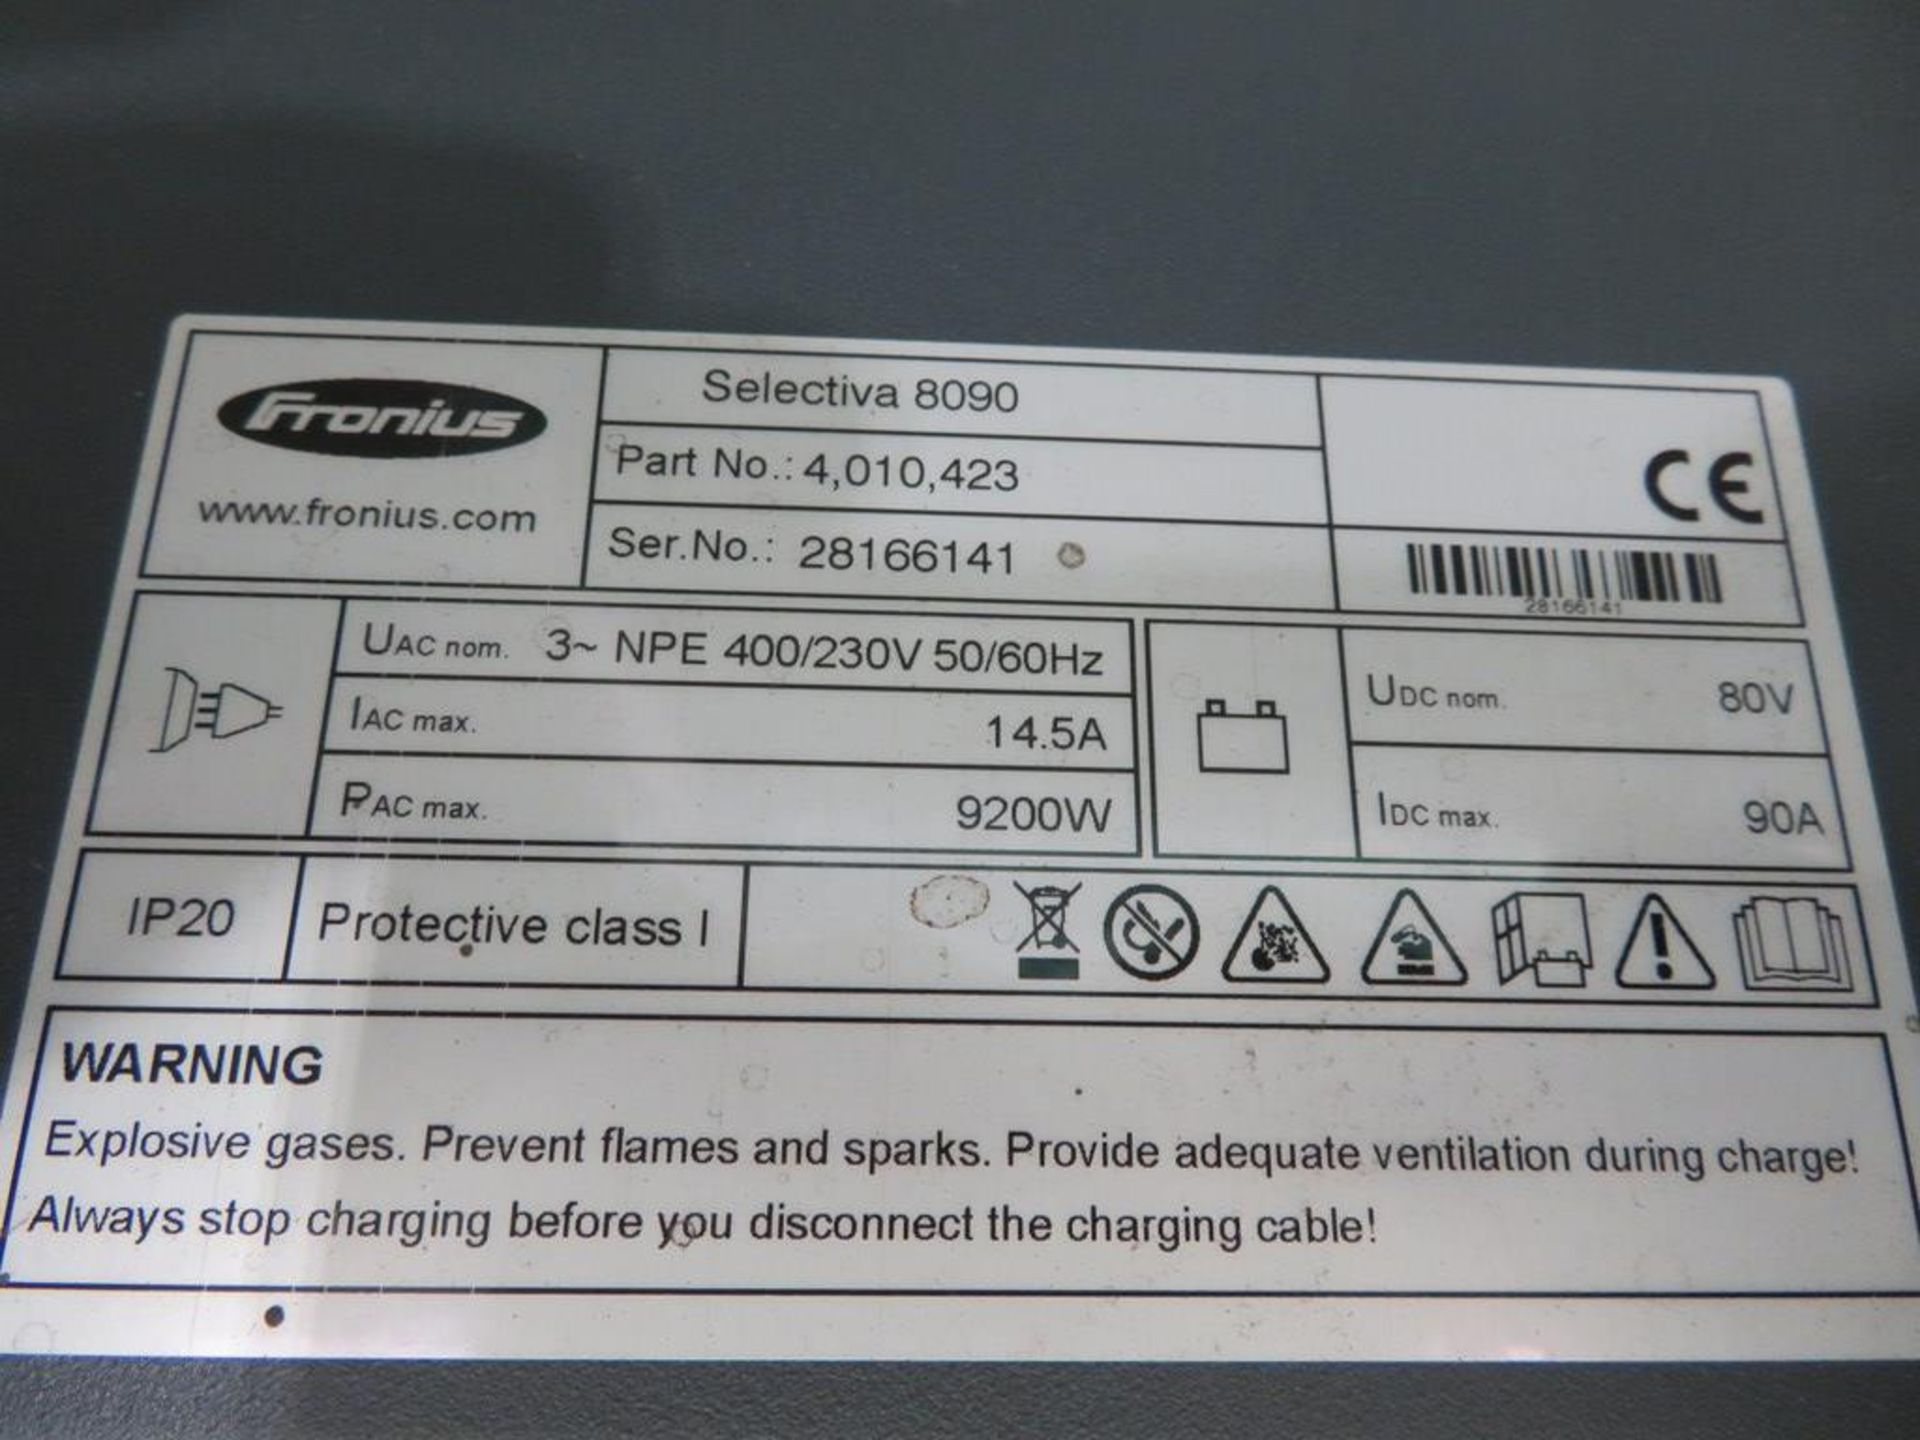 FRONIUS SELECTIVA 8090 8KW - 80V BATTERY CHARGER; SERIAL NO 28166141 - Image 2 of 2